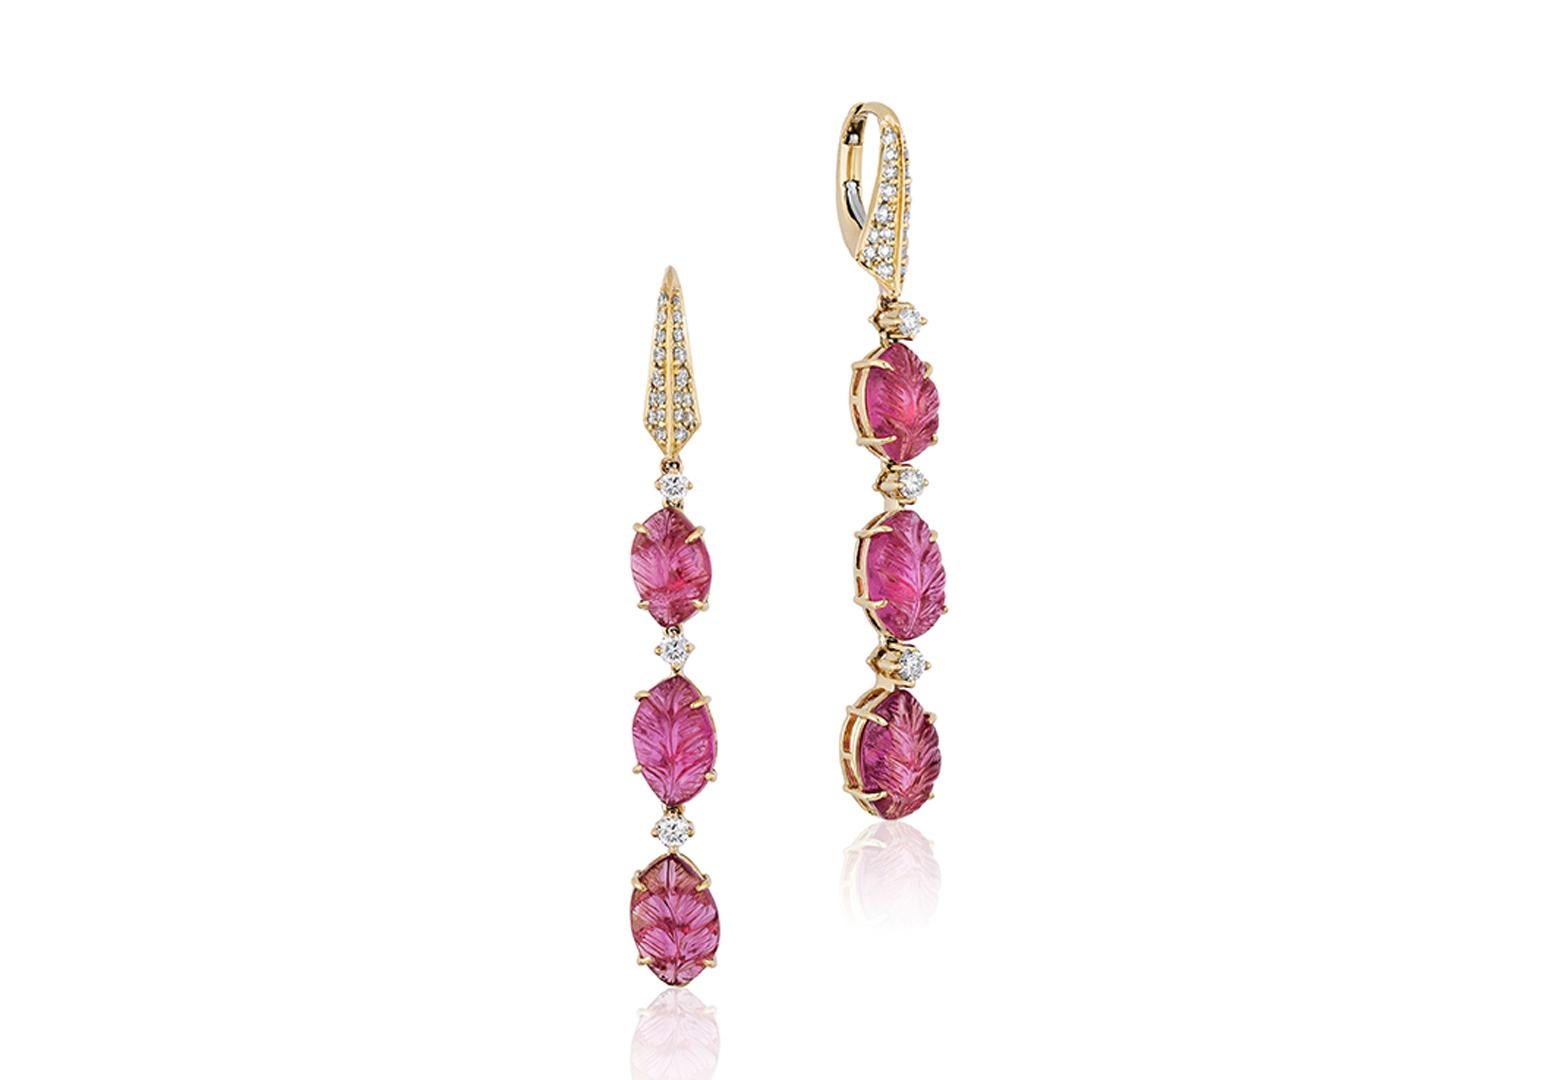 These Carved Rubelite Leaf Earrings with Diamonds from the 'G-One' Collection are a stunning pair of earrings made from 18K yellow gold. The earrings feature intricately carved rubelite gemstones in the shape of delicate leaves, which are